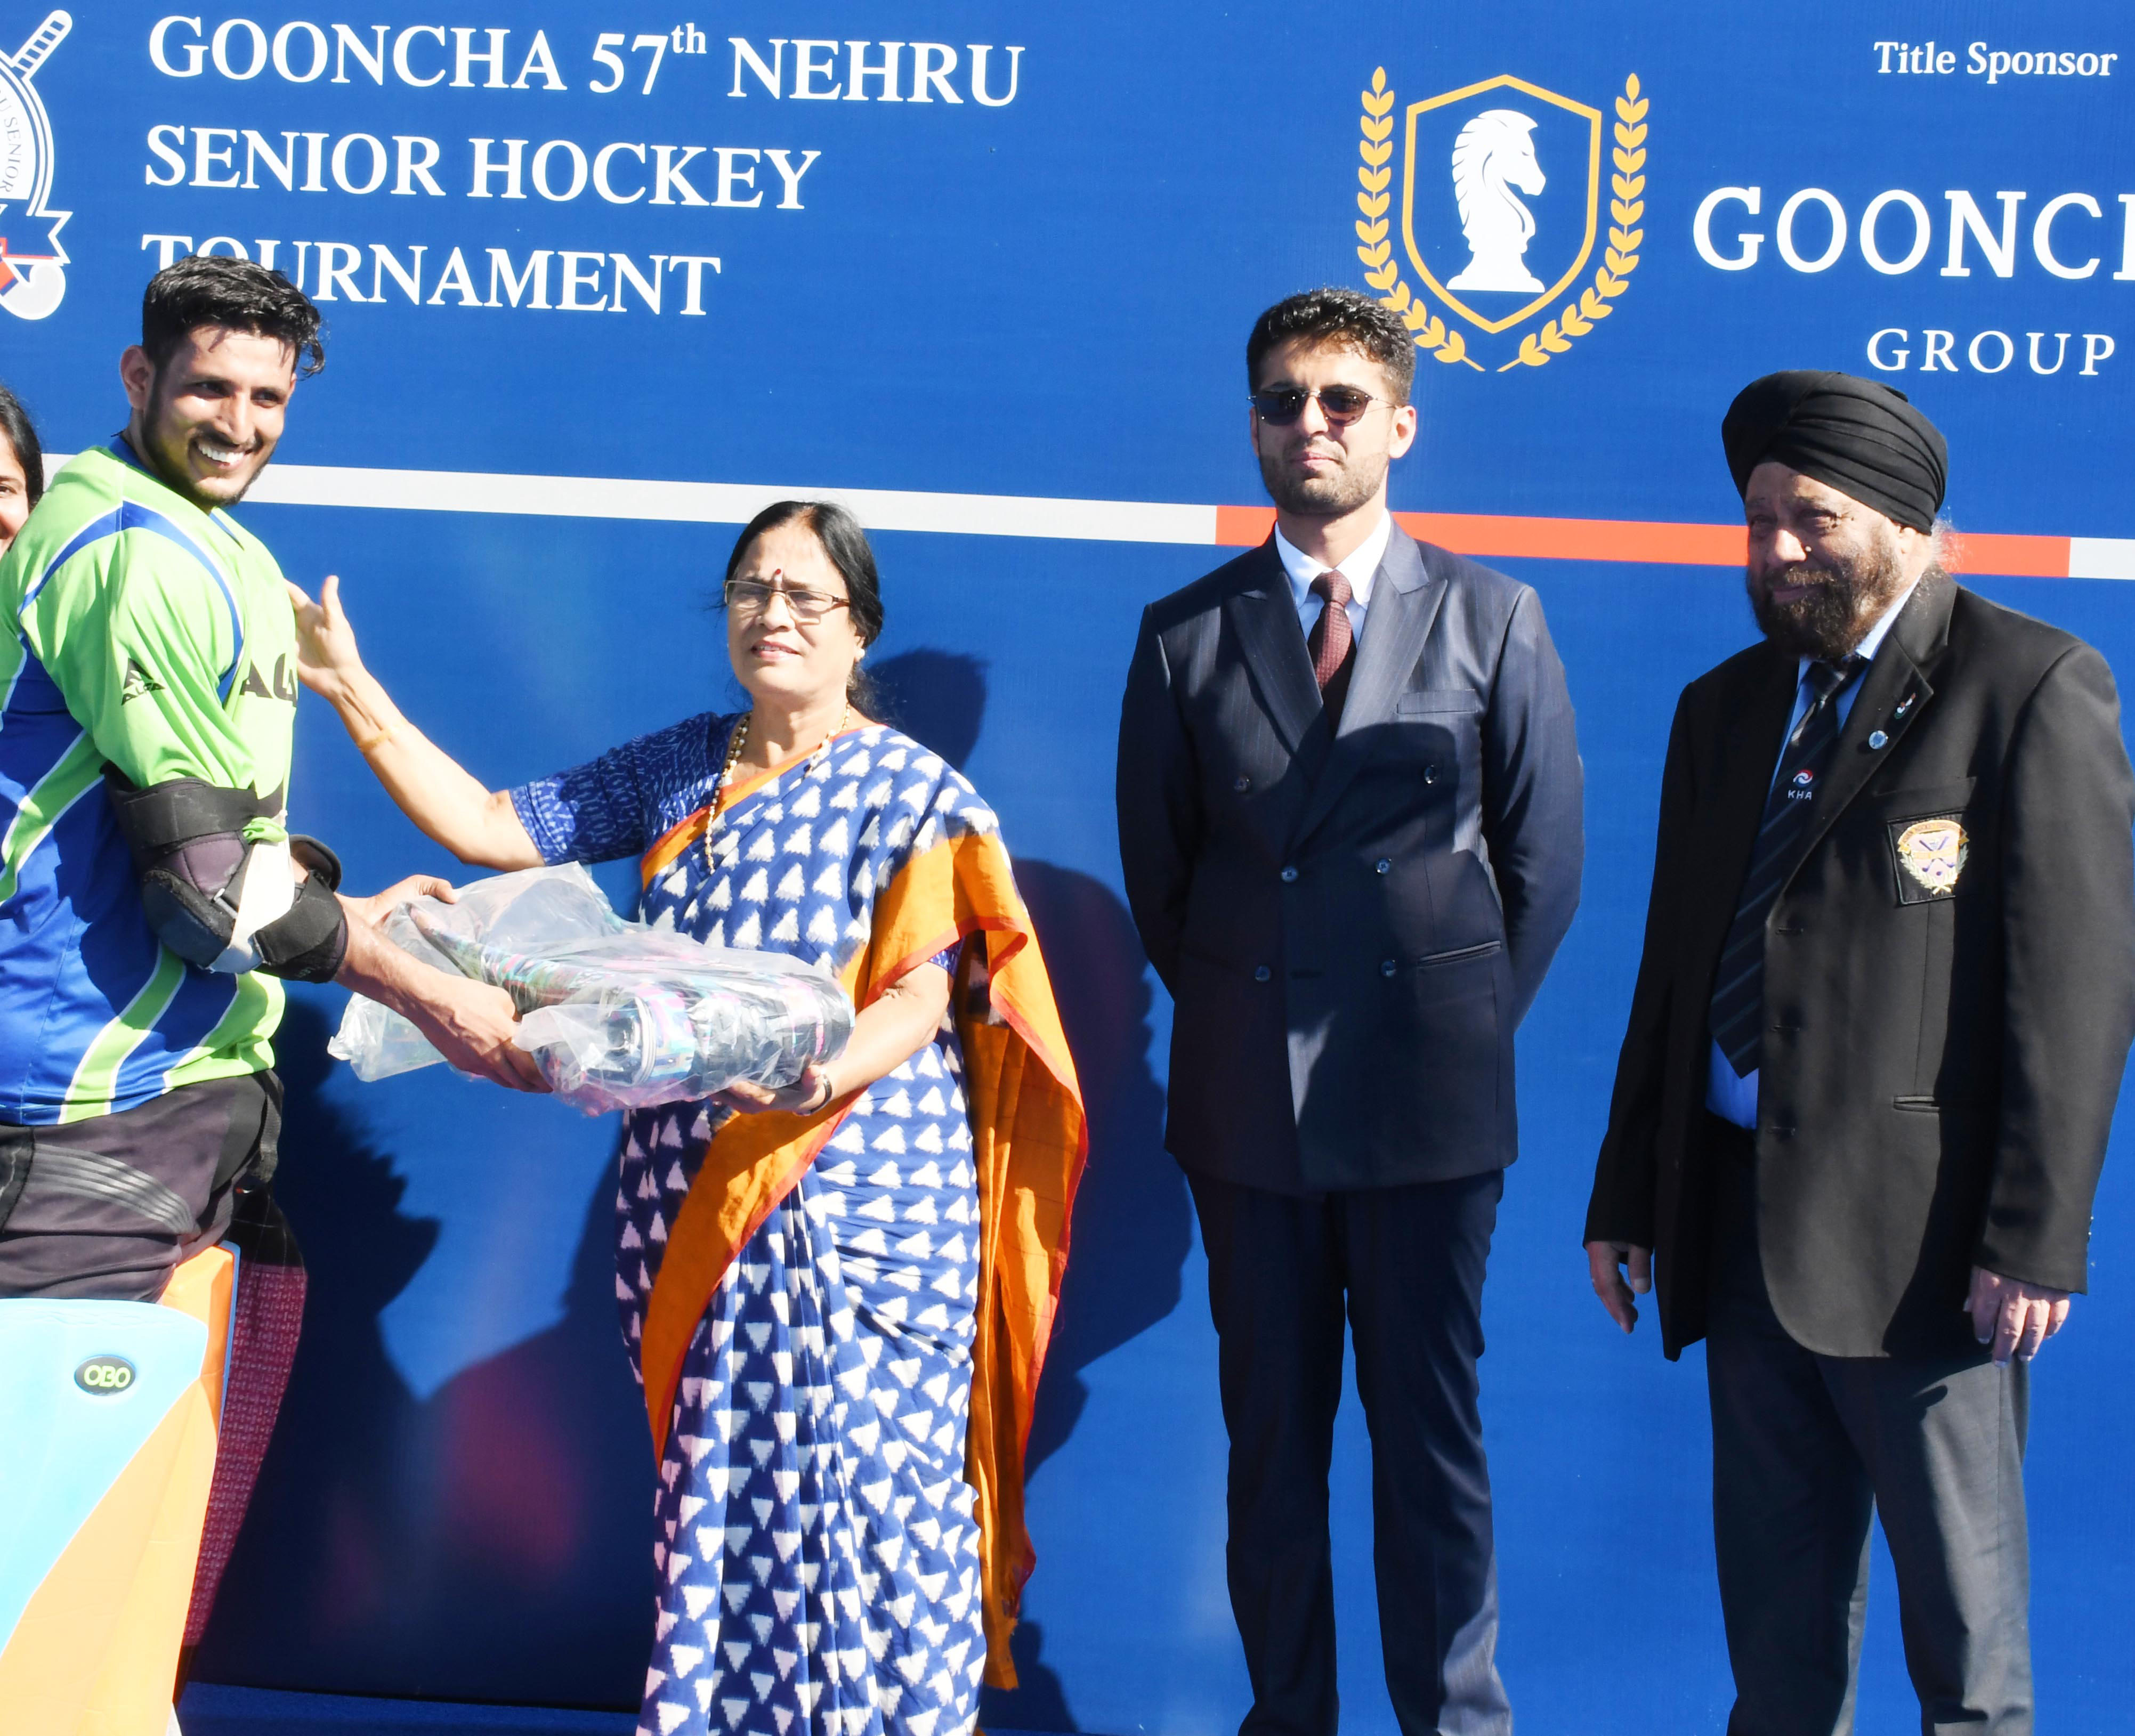 Five times winner Indian Oil into final by beating Indian Navy 6-4, at the 'Gooncha 57th Nehru Senior Hockey Tournament’!